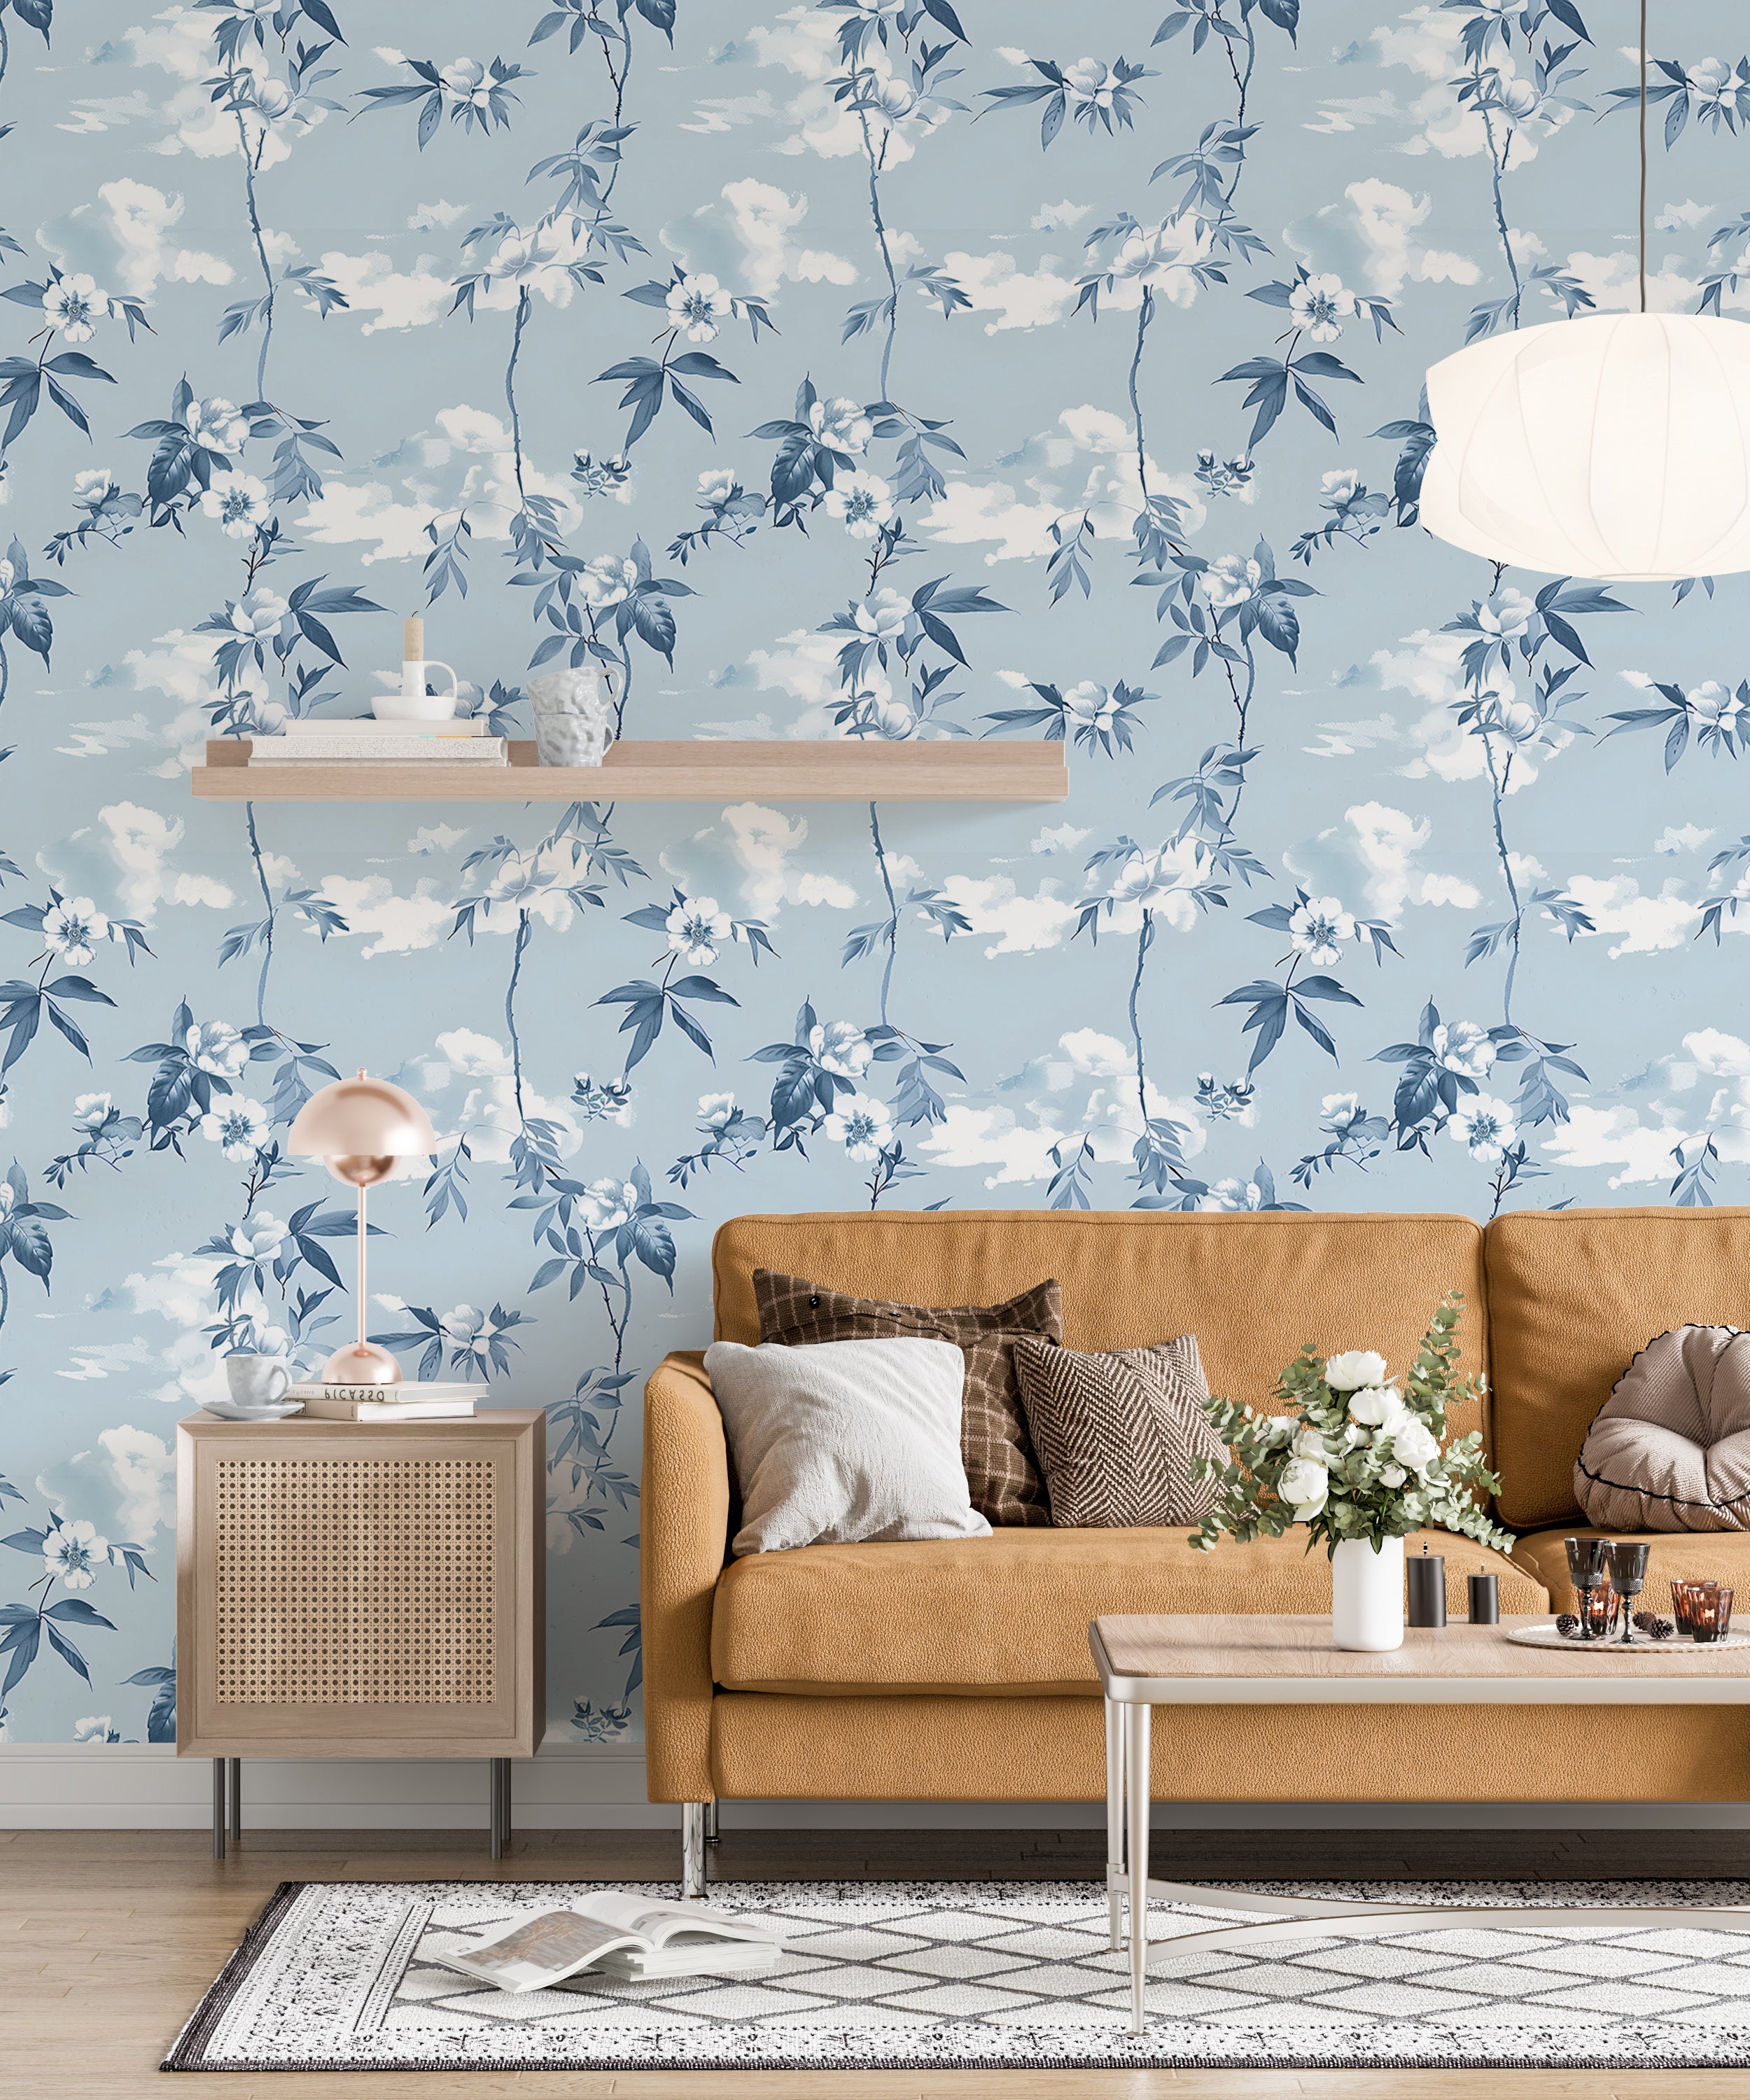 Sky Blue Floral Wallpaper, Light Botanical Peel and Stick Decor, Blue Vines and Leaves Wallpaper, Clouds Wall Decal, Flower Wallpaper